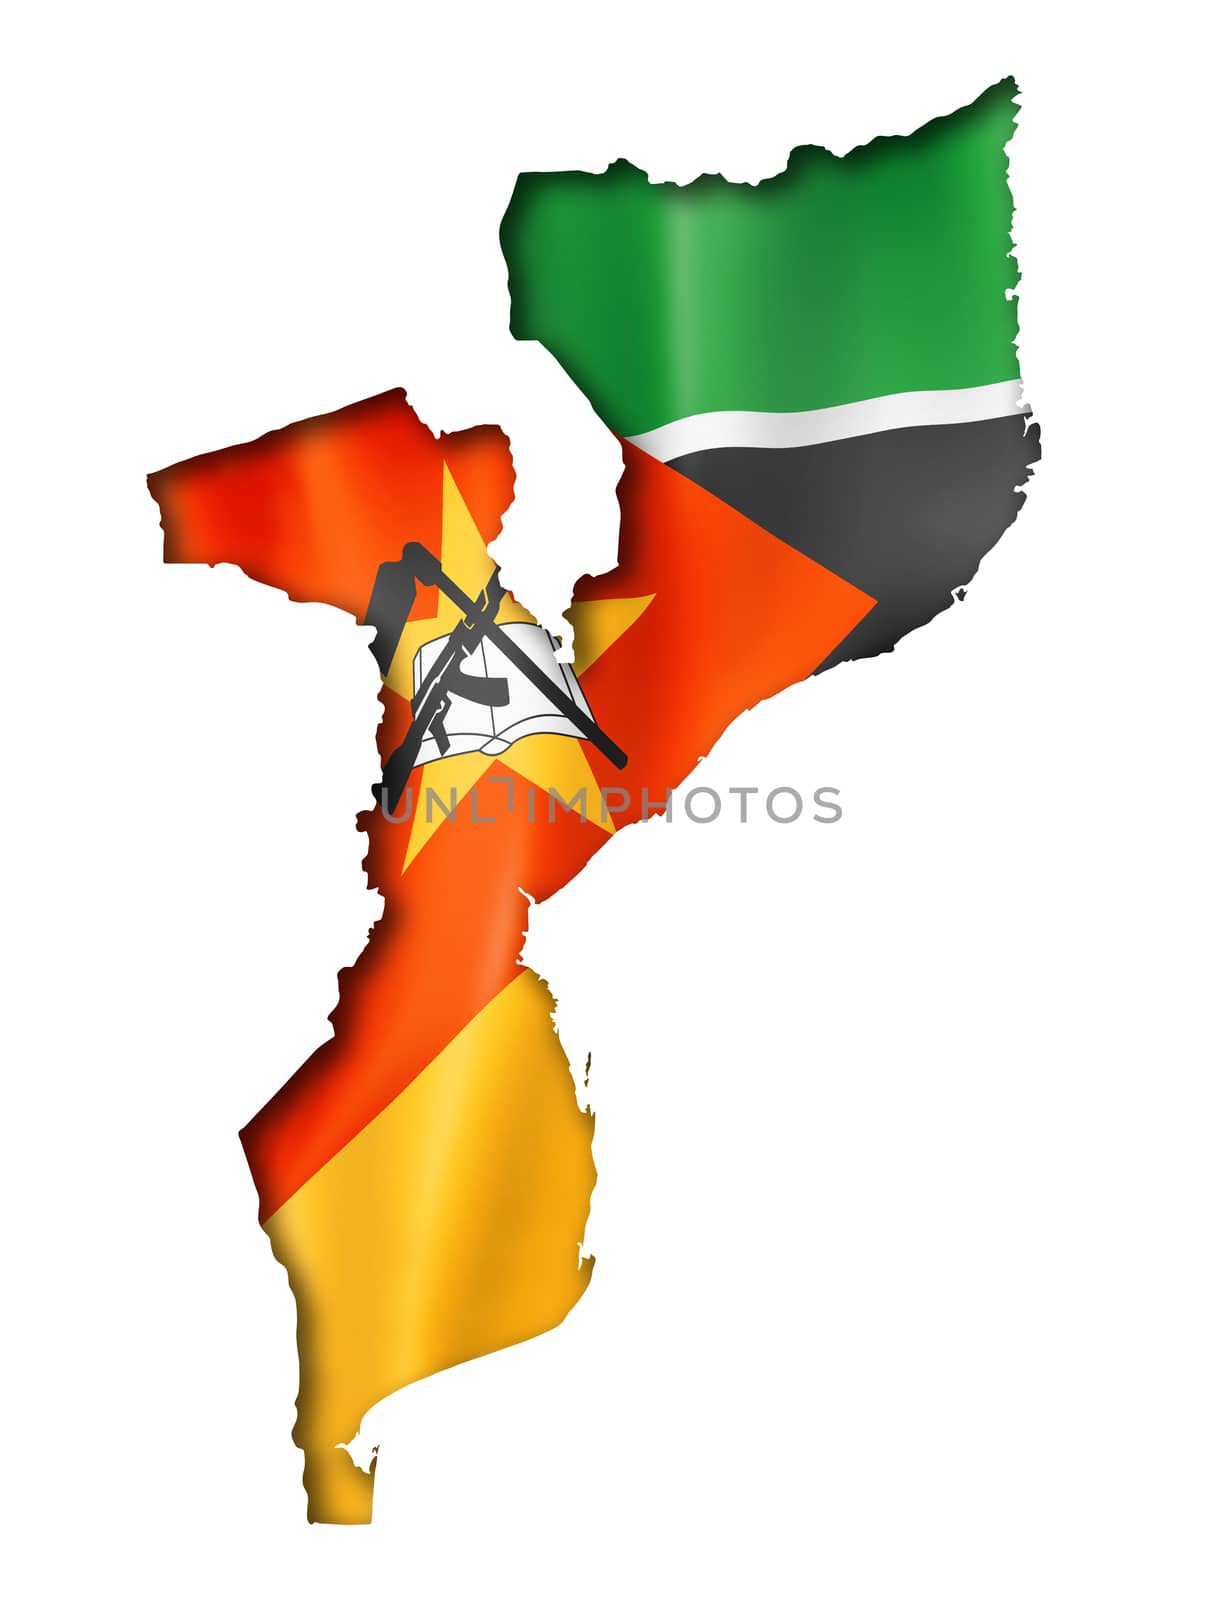 Mozambique flag map, three dimensional render, isolated on white